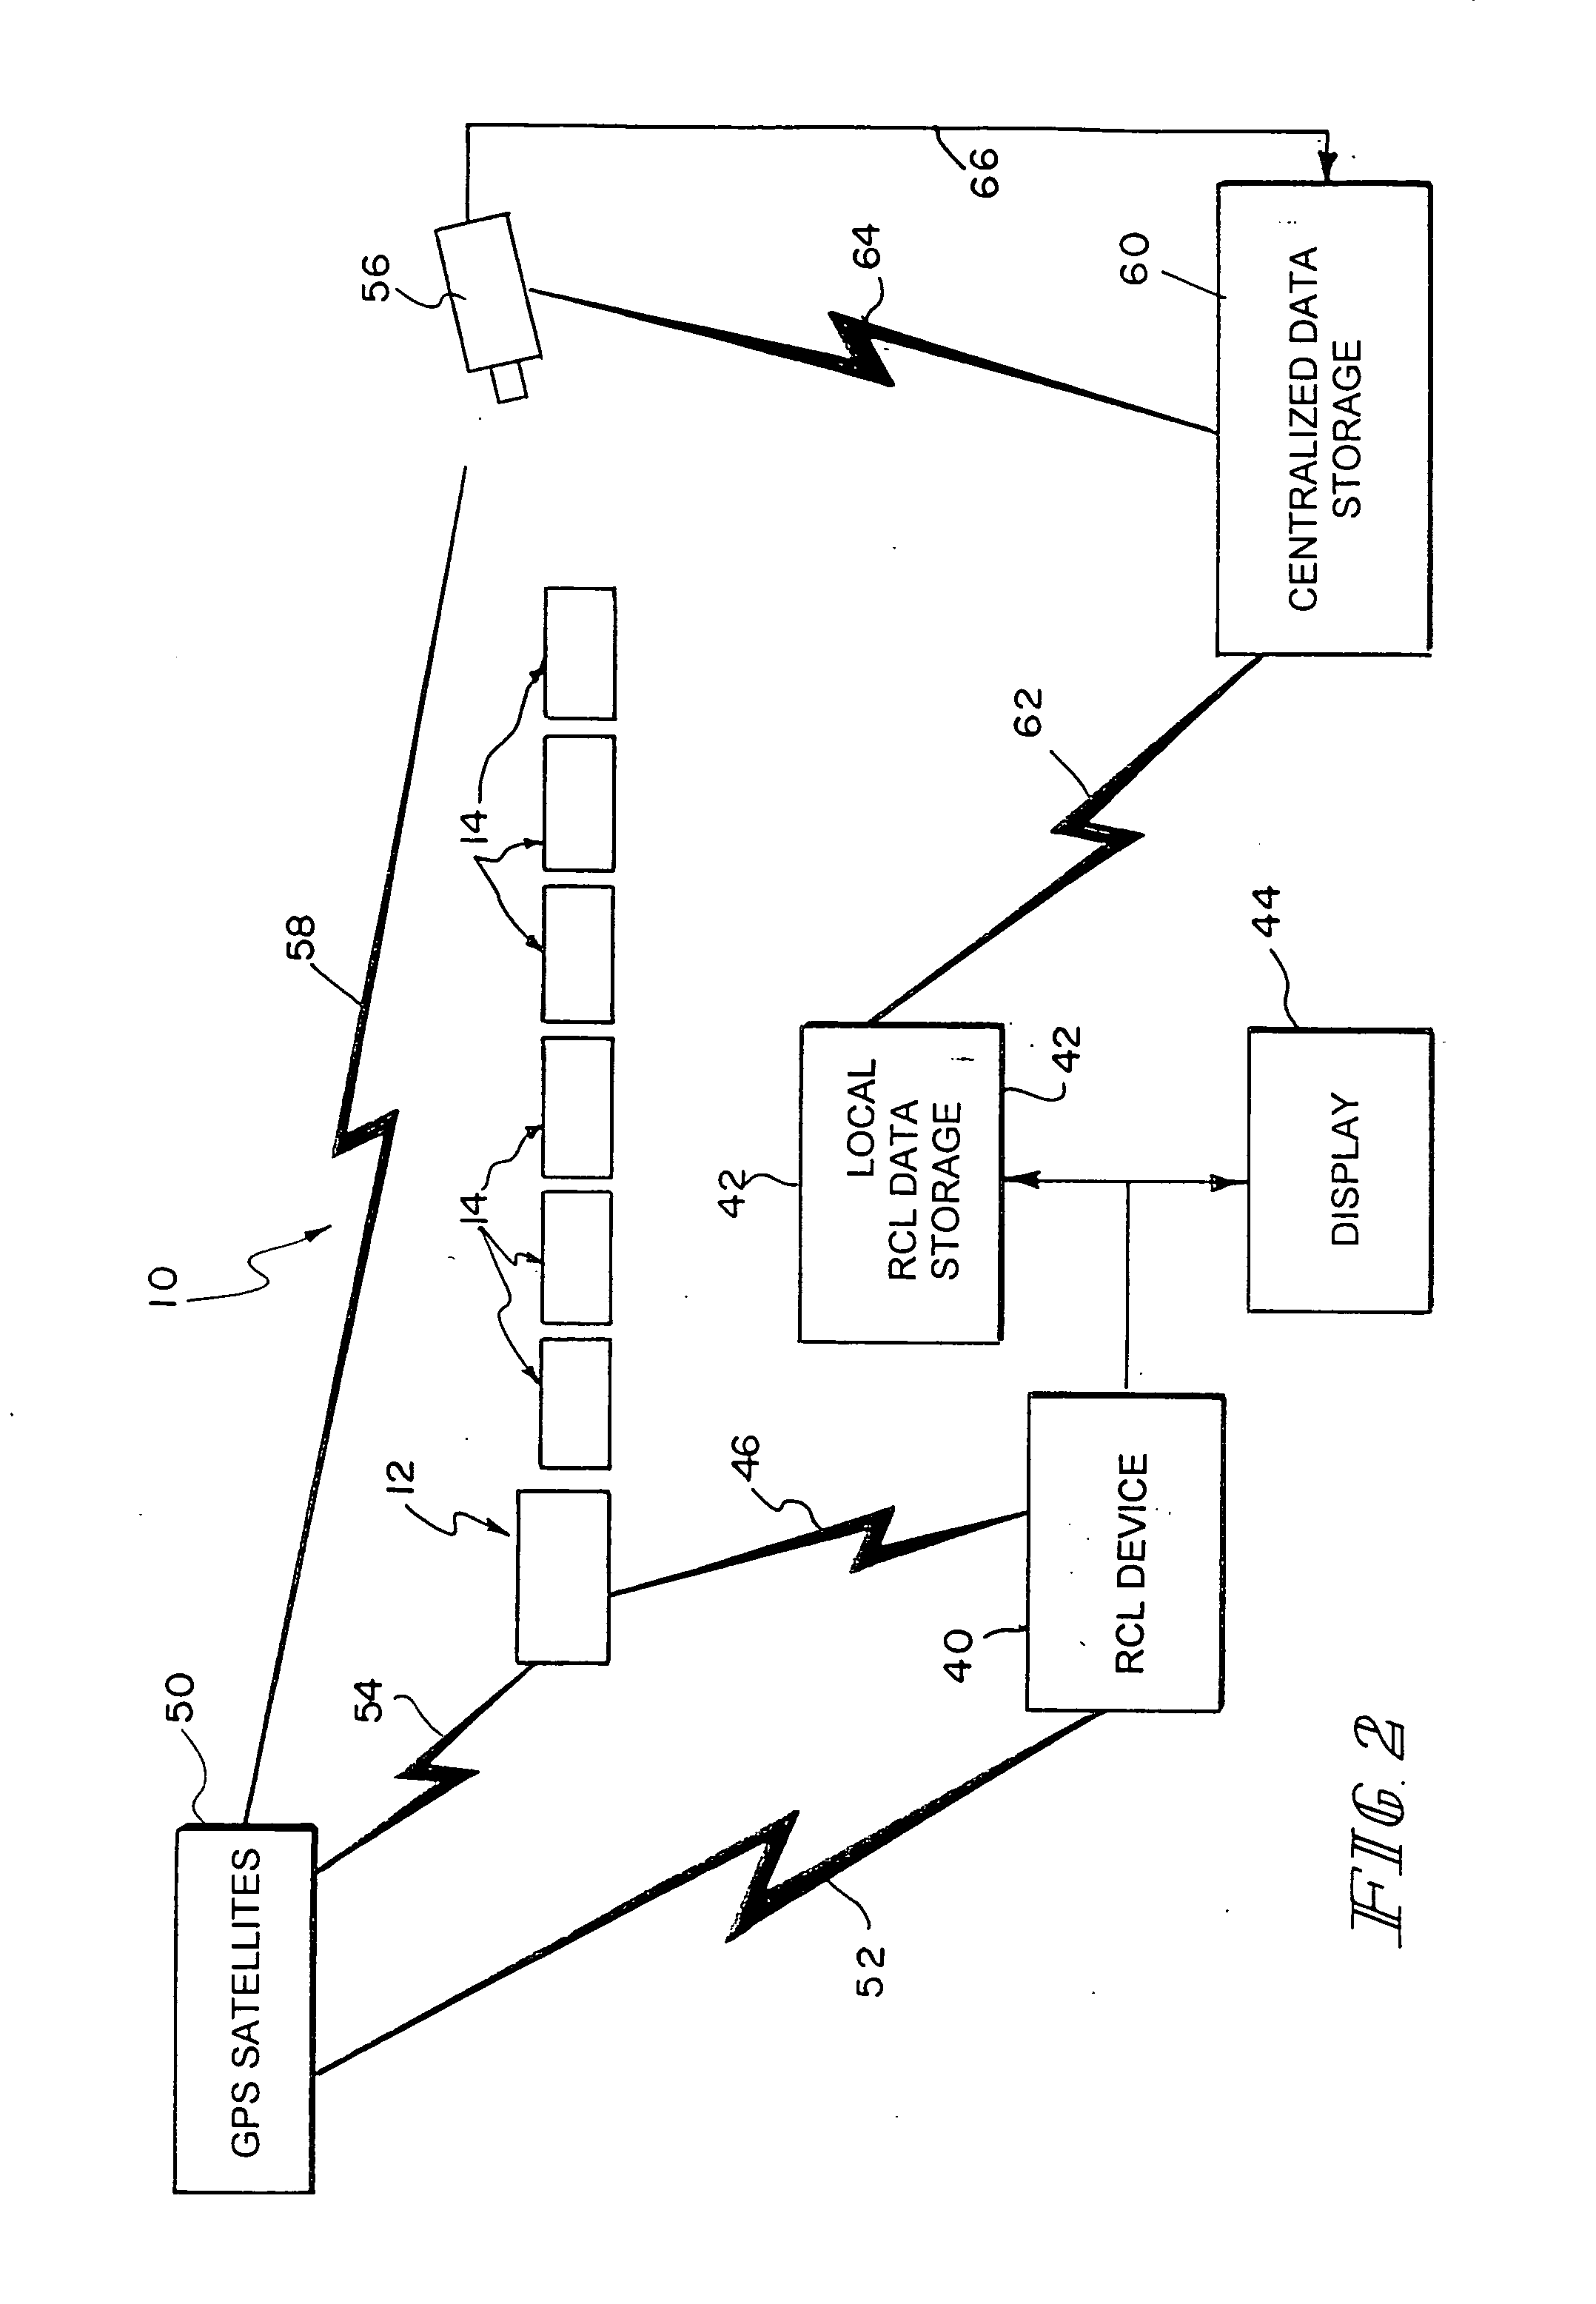 Method of marshalling cars into a train